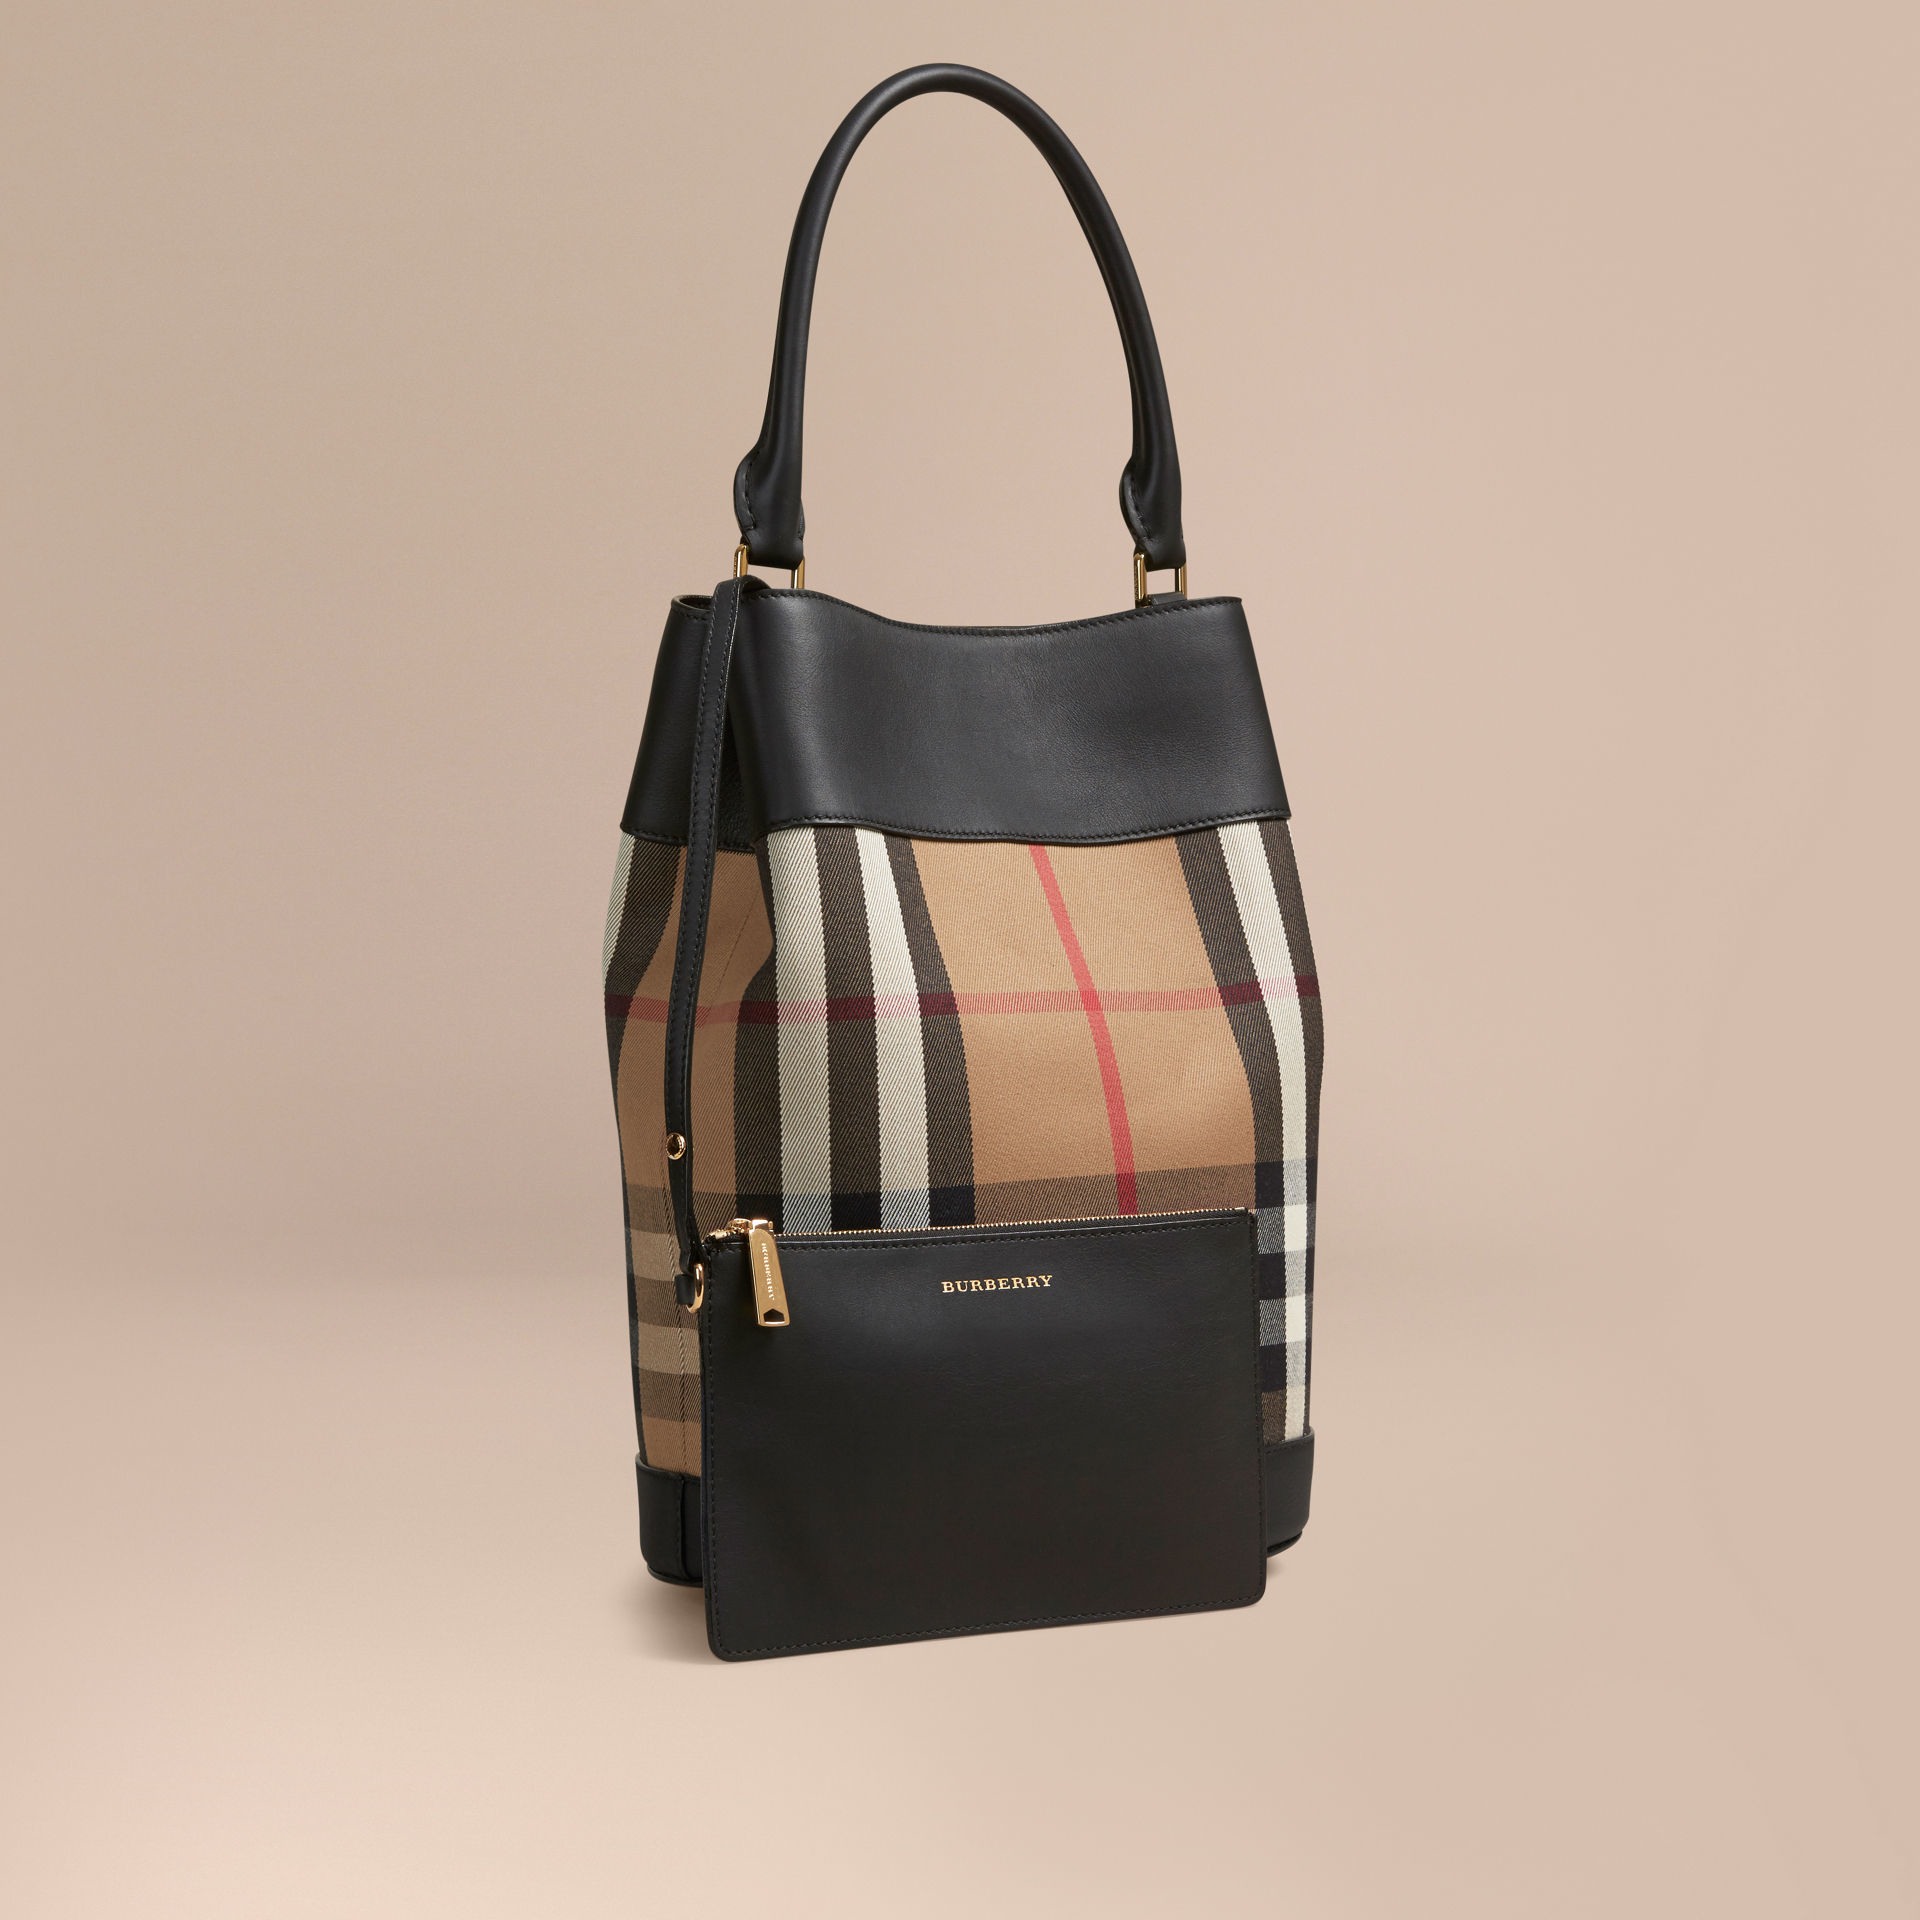 Burberry The Bucket Bag In House Check And Leather Black in Black - Lyst